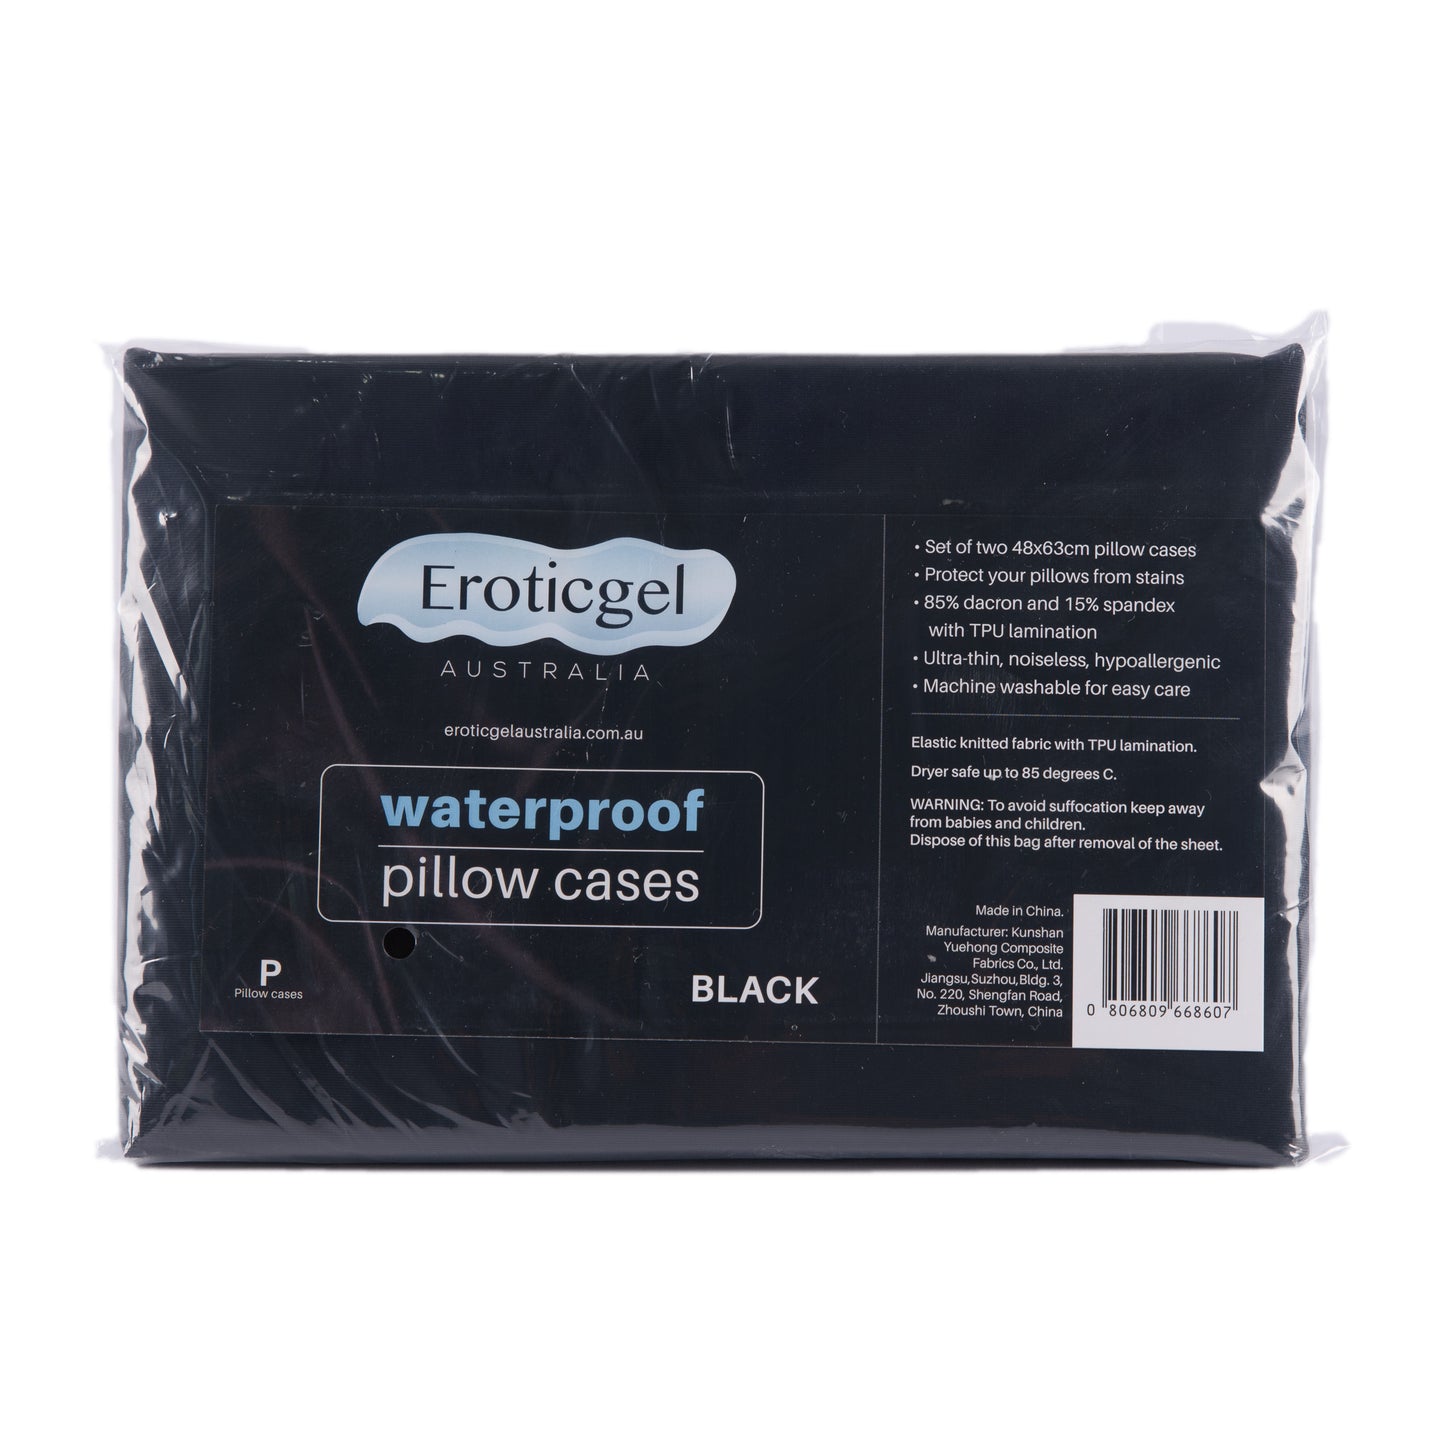 Black Waterproof Fitted pillow case (2pc) - Just for you desires